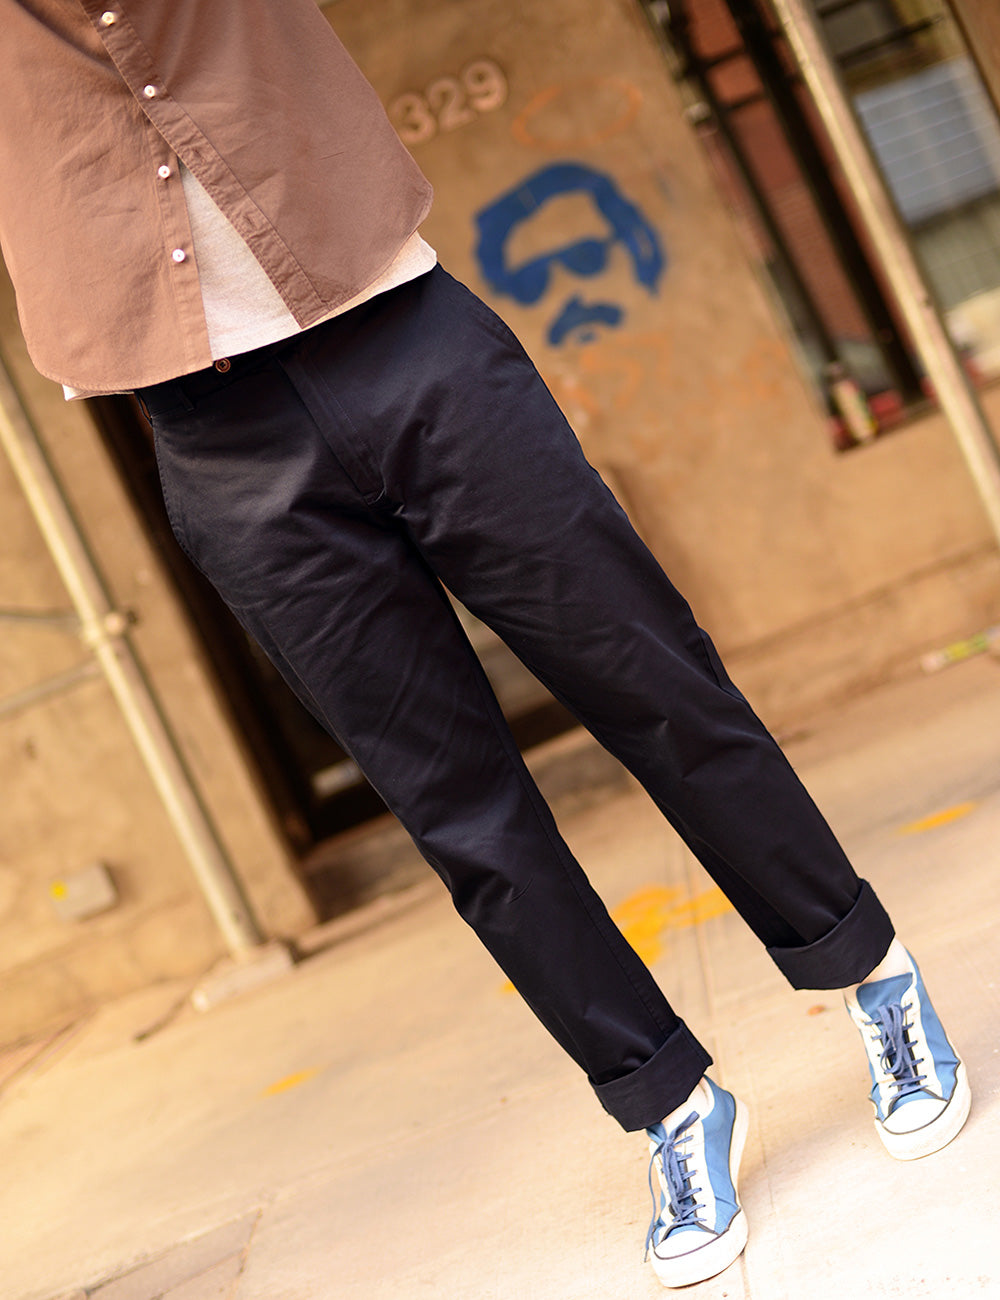 Cropped image of a model (face cropped) wearing navy chinos, sneakers, a t-shirt and an overshirt.